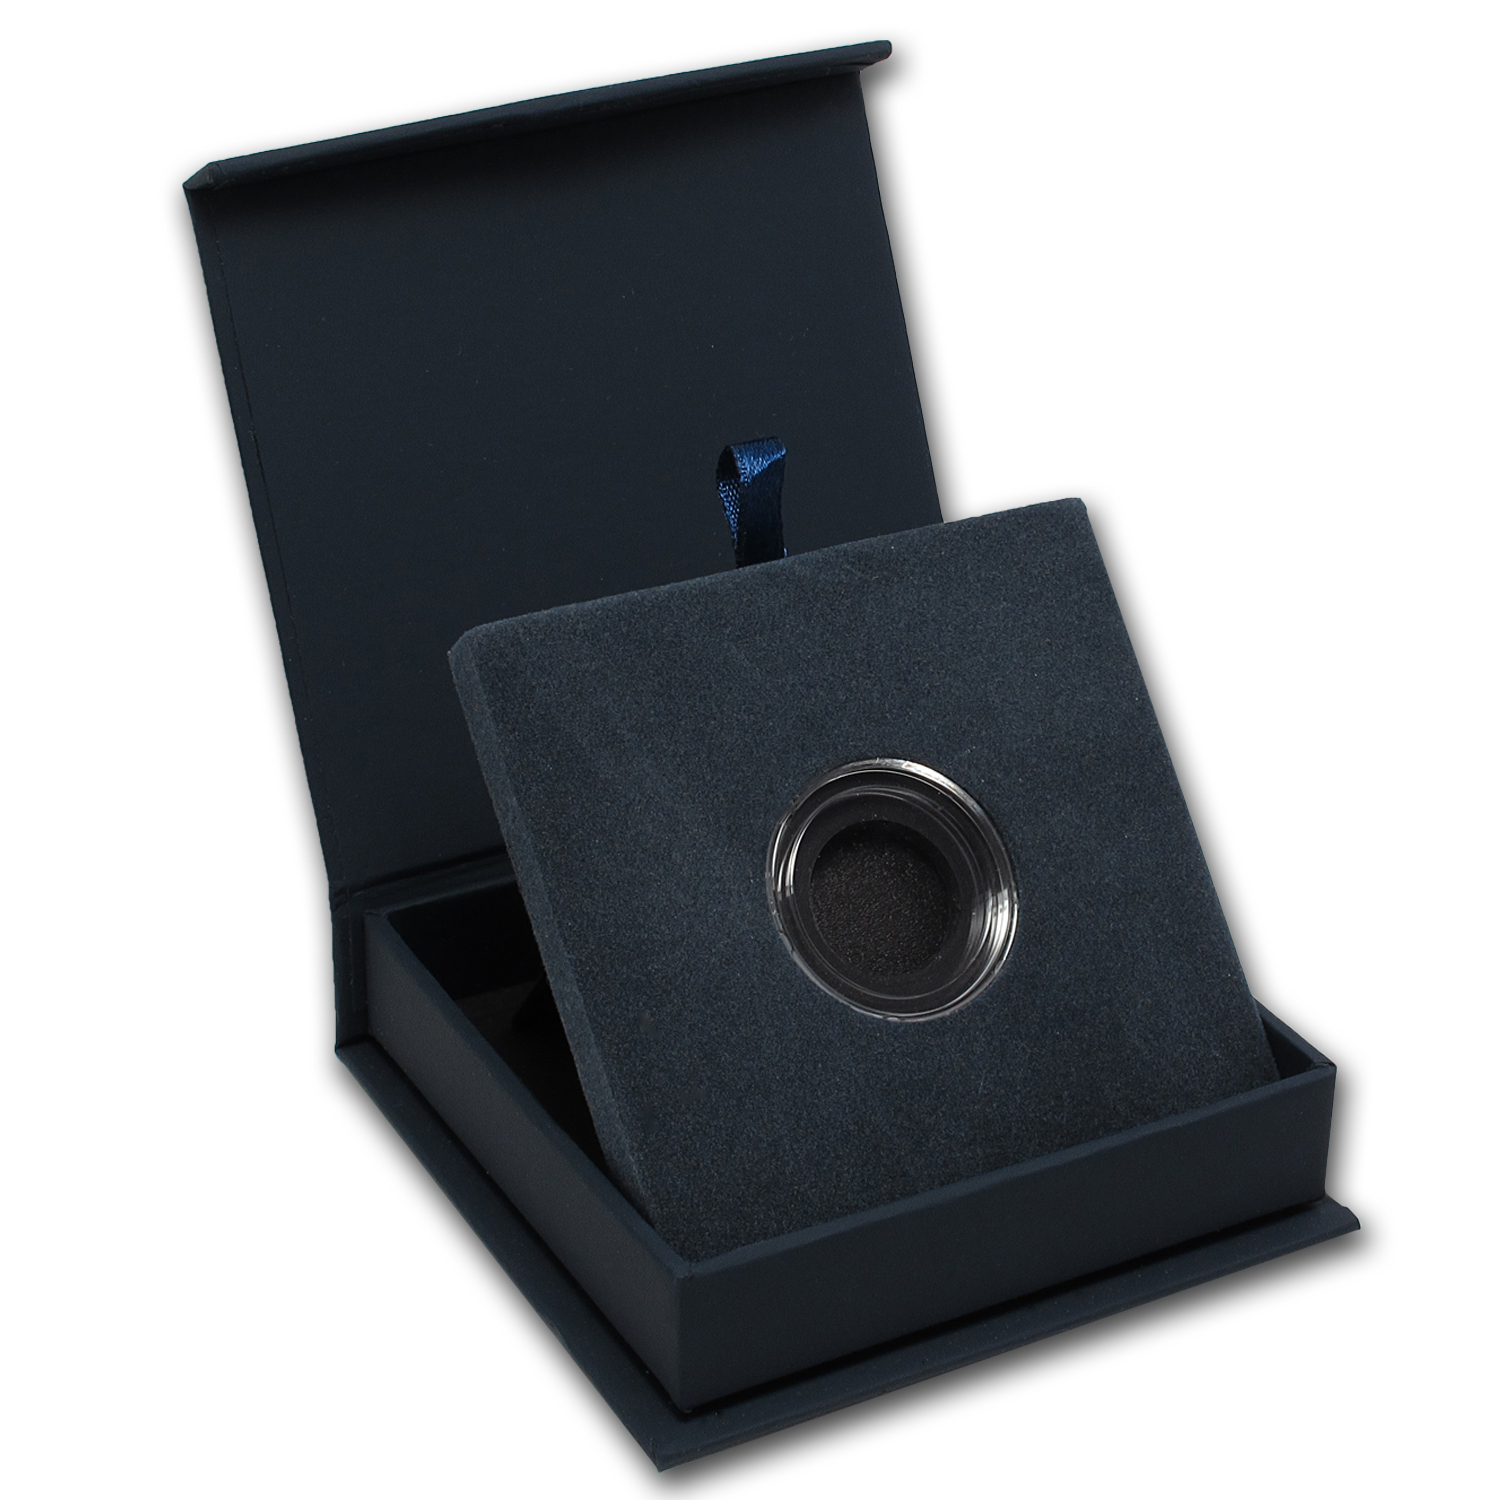 Buy APMEX Gift Box - Includes 24 mm Direct Fit Air-Tite Holder